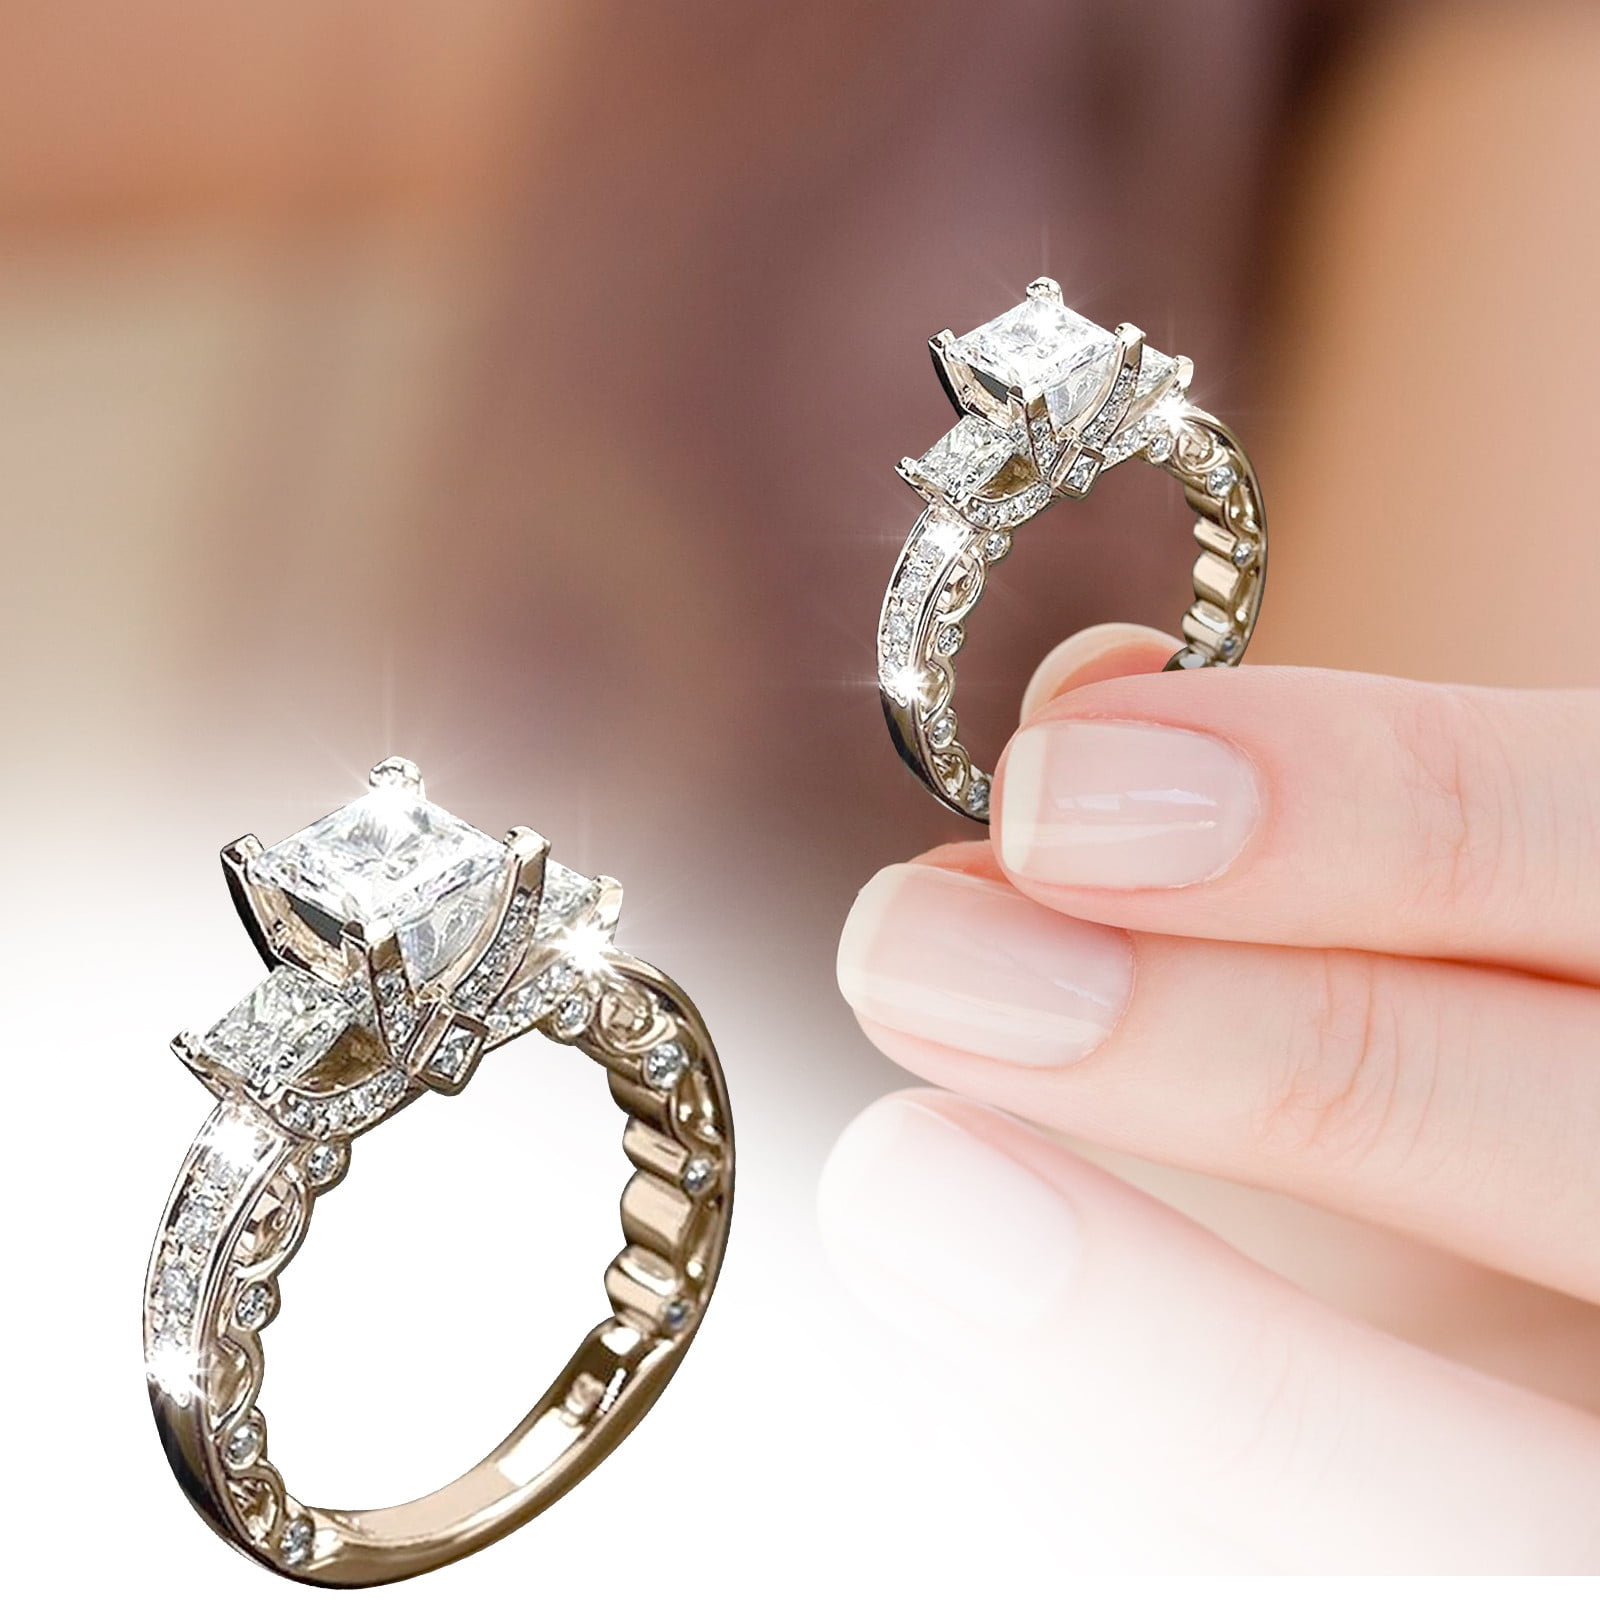 Rings Jewelry For Women And Girls Diamond Ring Popular Exquisite Ring Simple  Fashion Jewelry Popular Accessories - Walmart.com